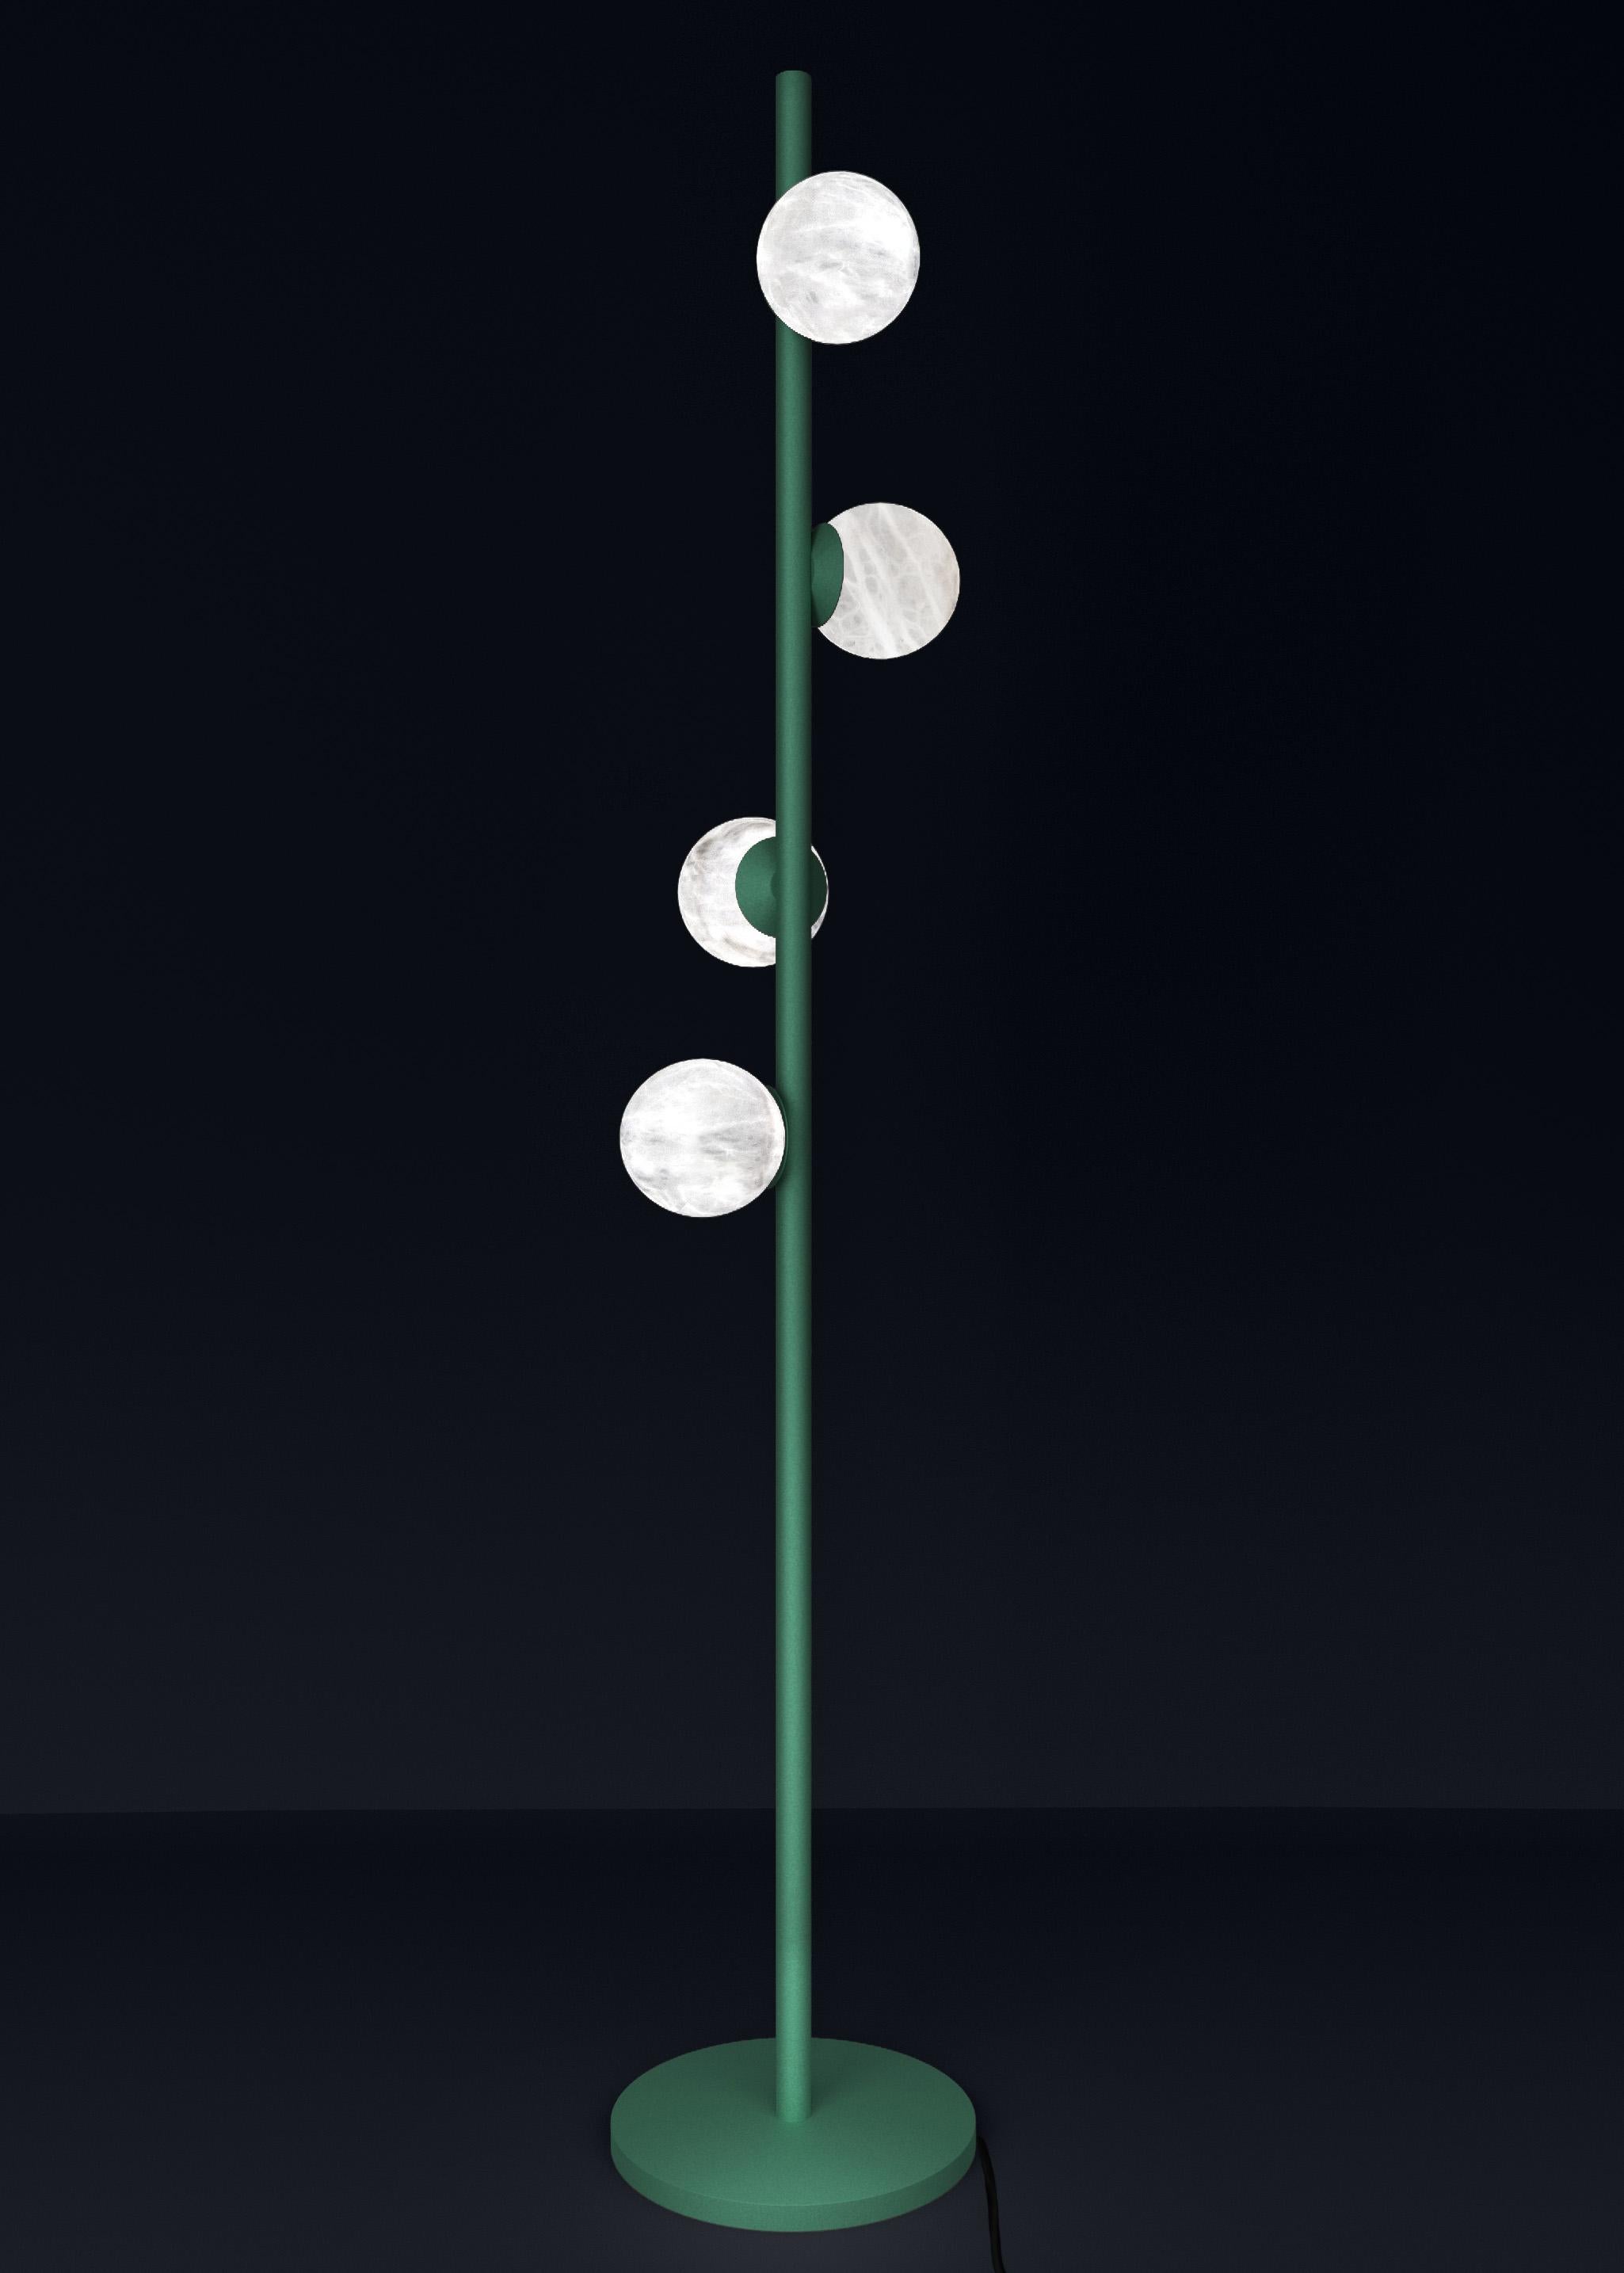 Ofione Freedom Green Metal Floor Lamp by Alabastro Italiano
Dimensions: D 50 x W 50 x H 170 cm.
Materials: White alabaster and metal.

Available in different finishes: Shiny Silver, Bronze, Brushed Brass, Matte Black, Ruggine of Florence, Brushed